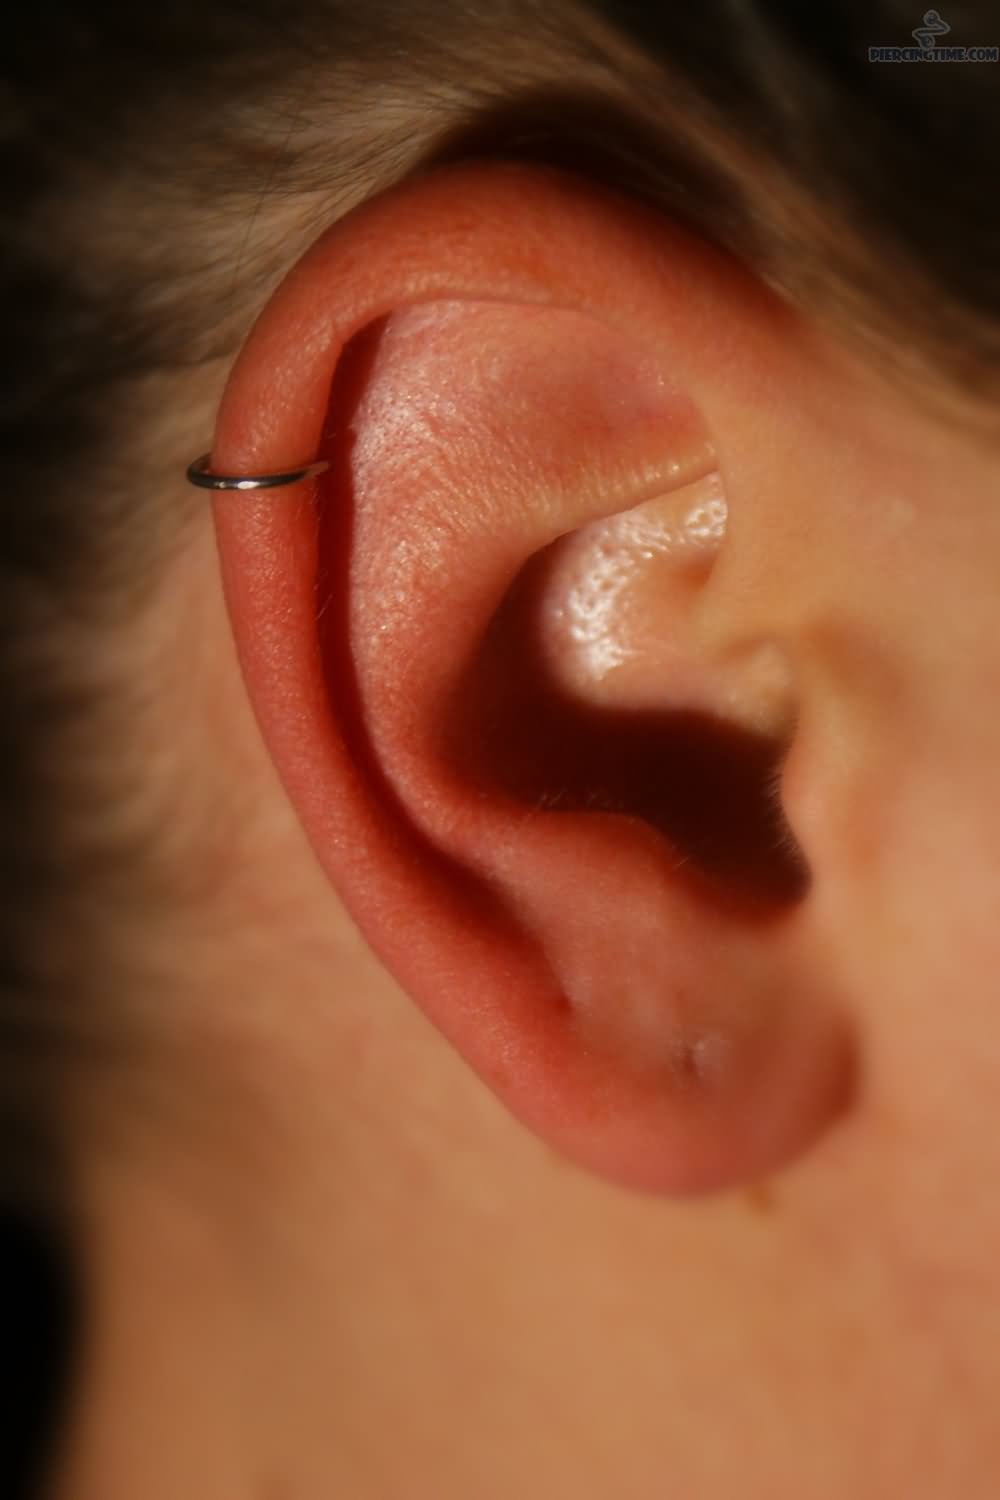 Simple Rim Piercing With Ring